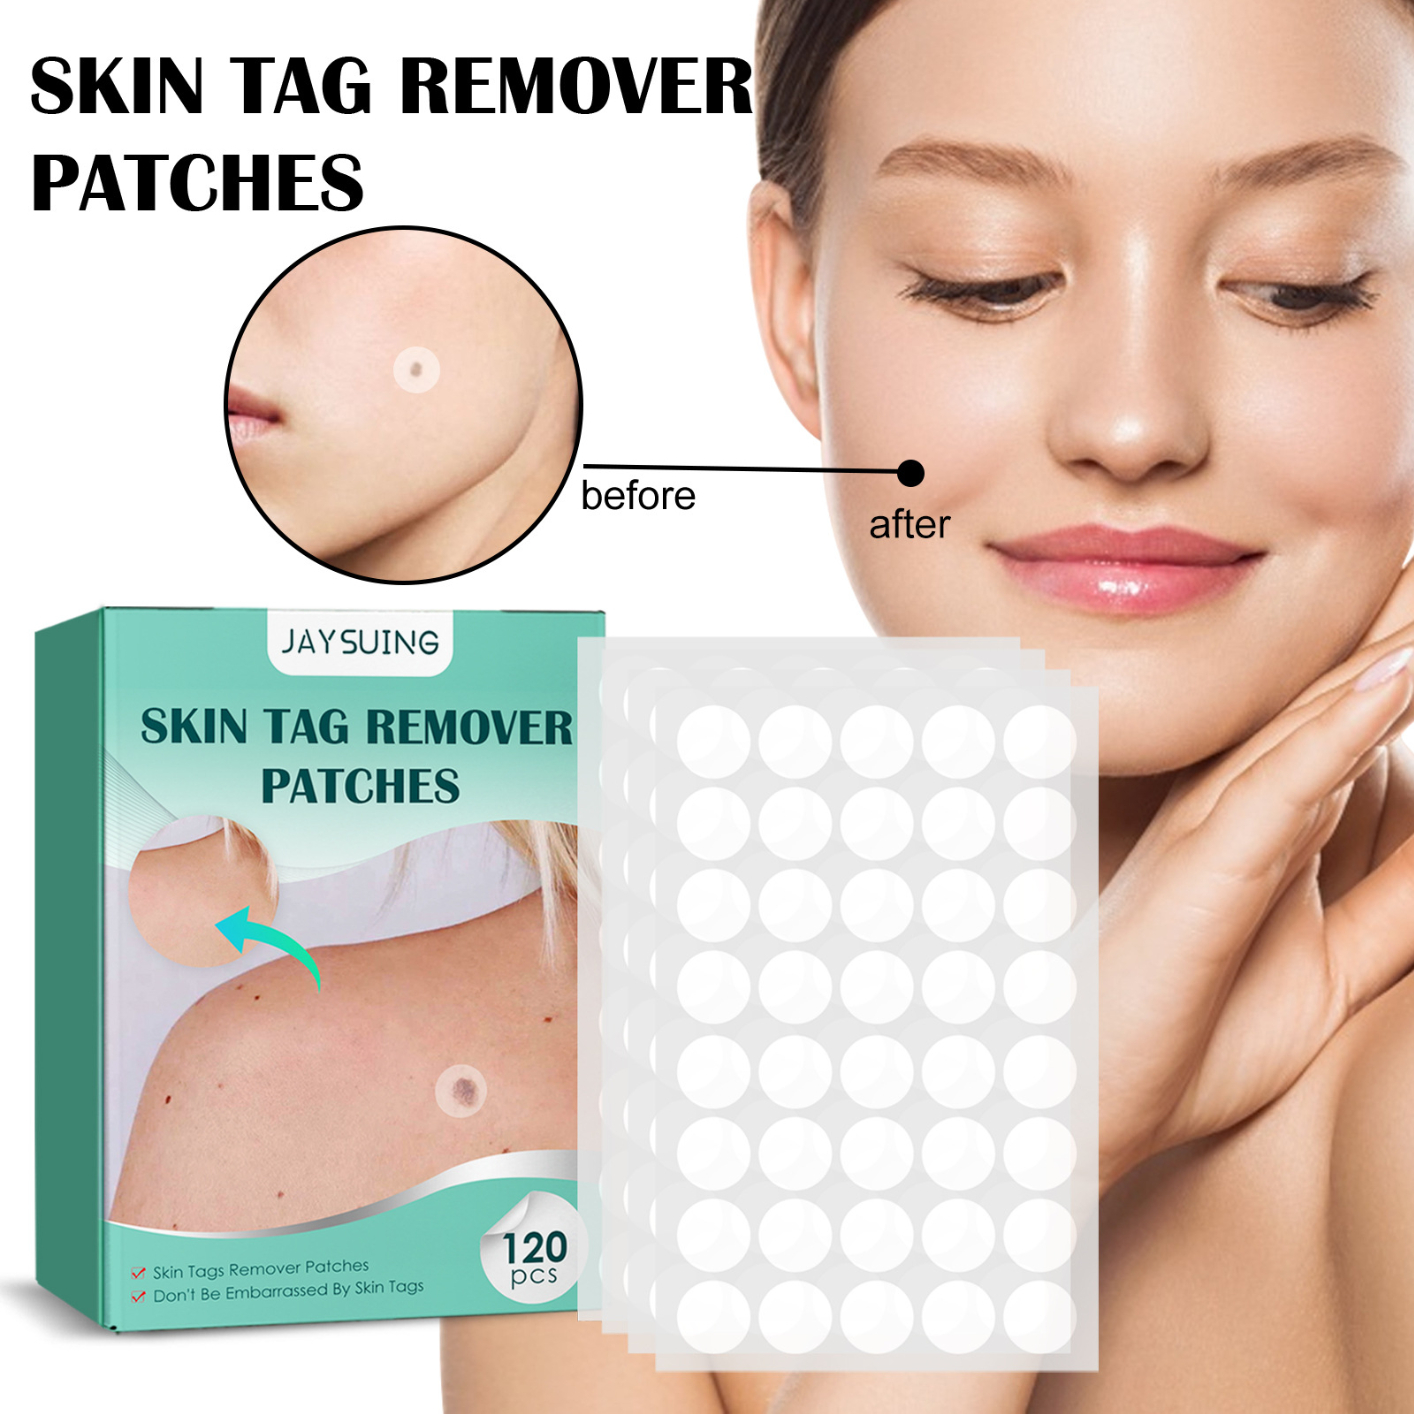 120PCS Skin Tag Remover for 2-5mm Skin Tag, Skin Tag Remover Patches, Face Care Mole Wart Tool, Green Skin Tag Removal Kit, Easy to Use